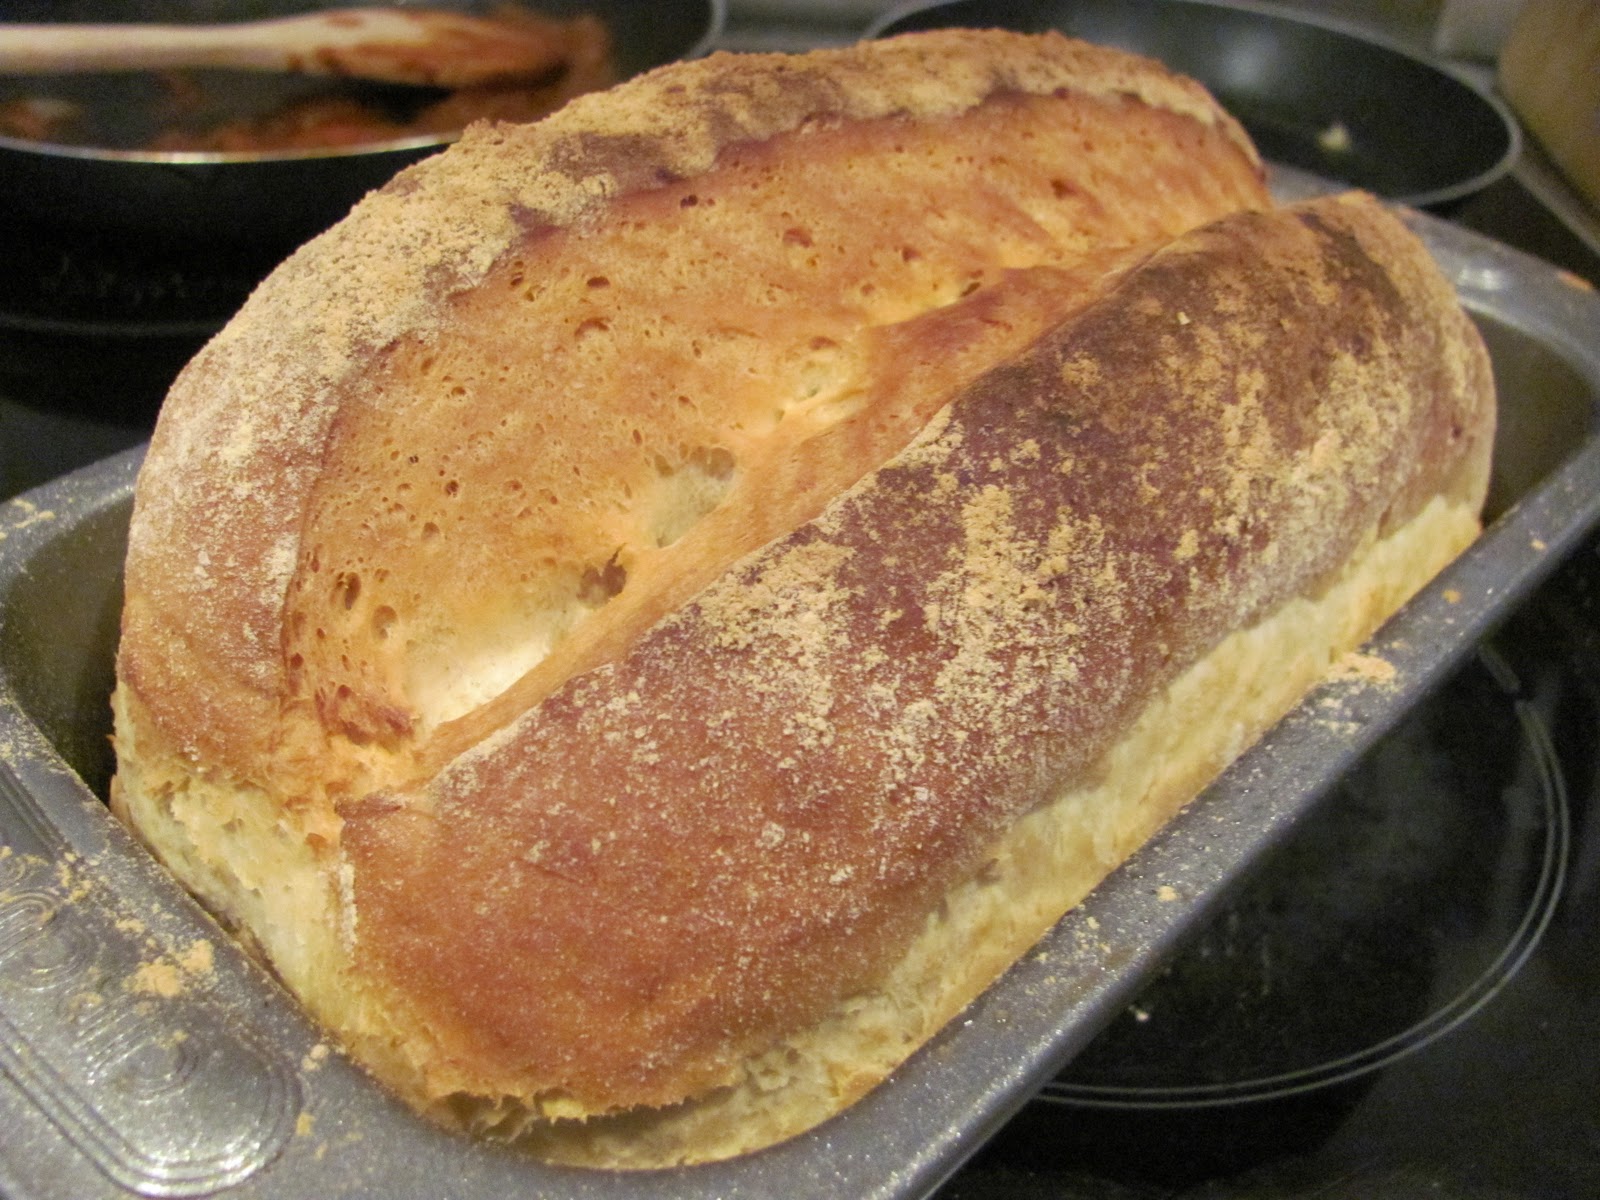 Bakercourt - Knitting, Sewing, Crafting.: Freshly Baked Bread and ...